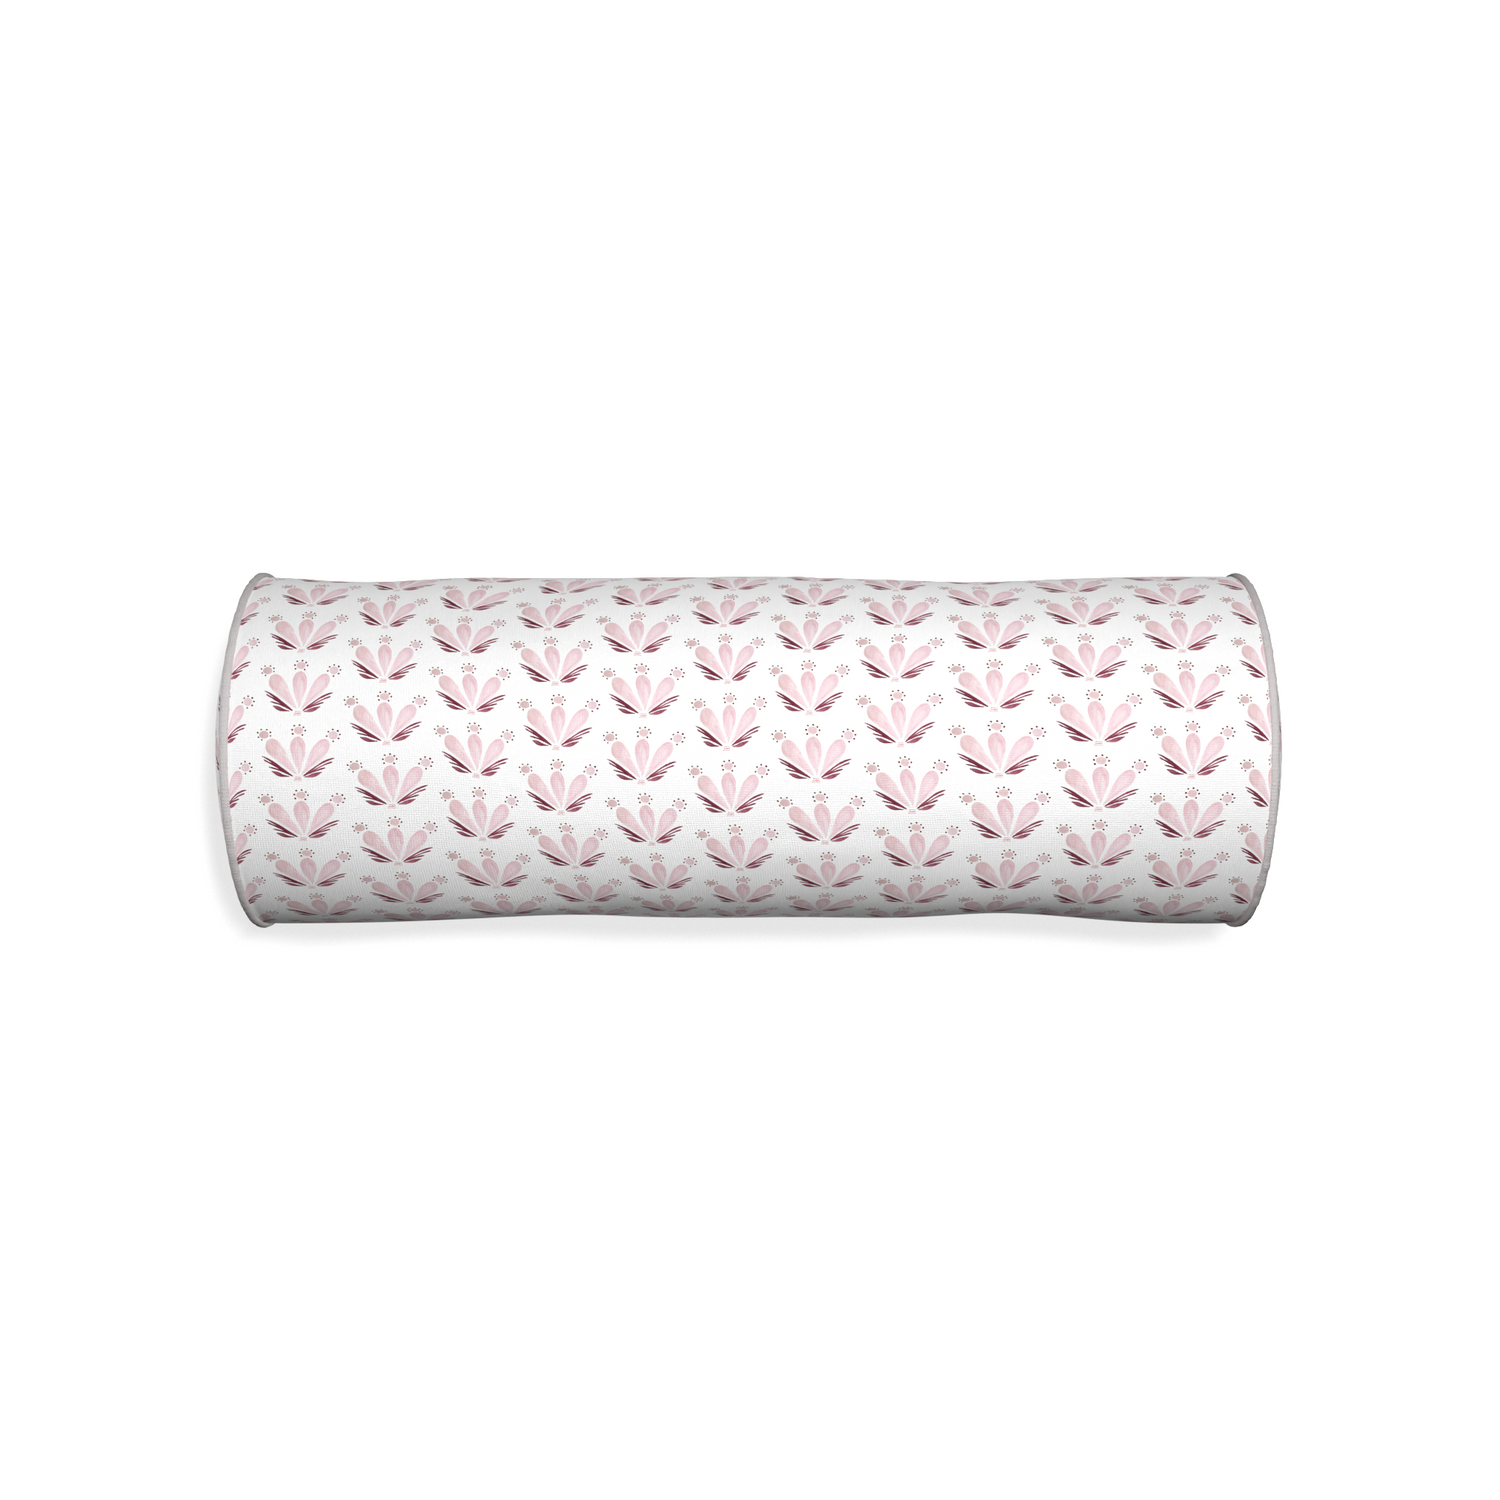 Bolster serena pink custom pillow with pebble piping on white background